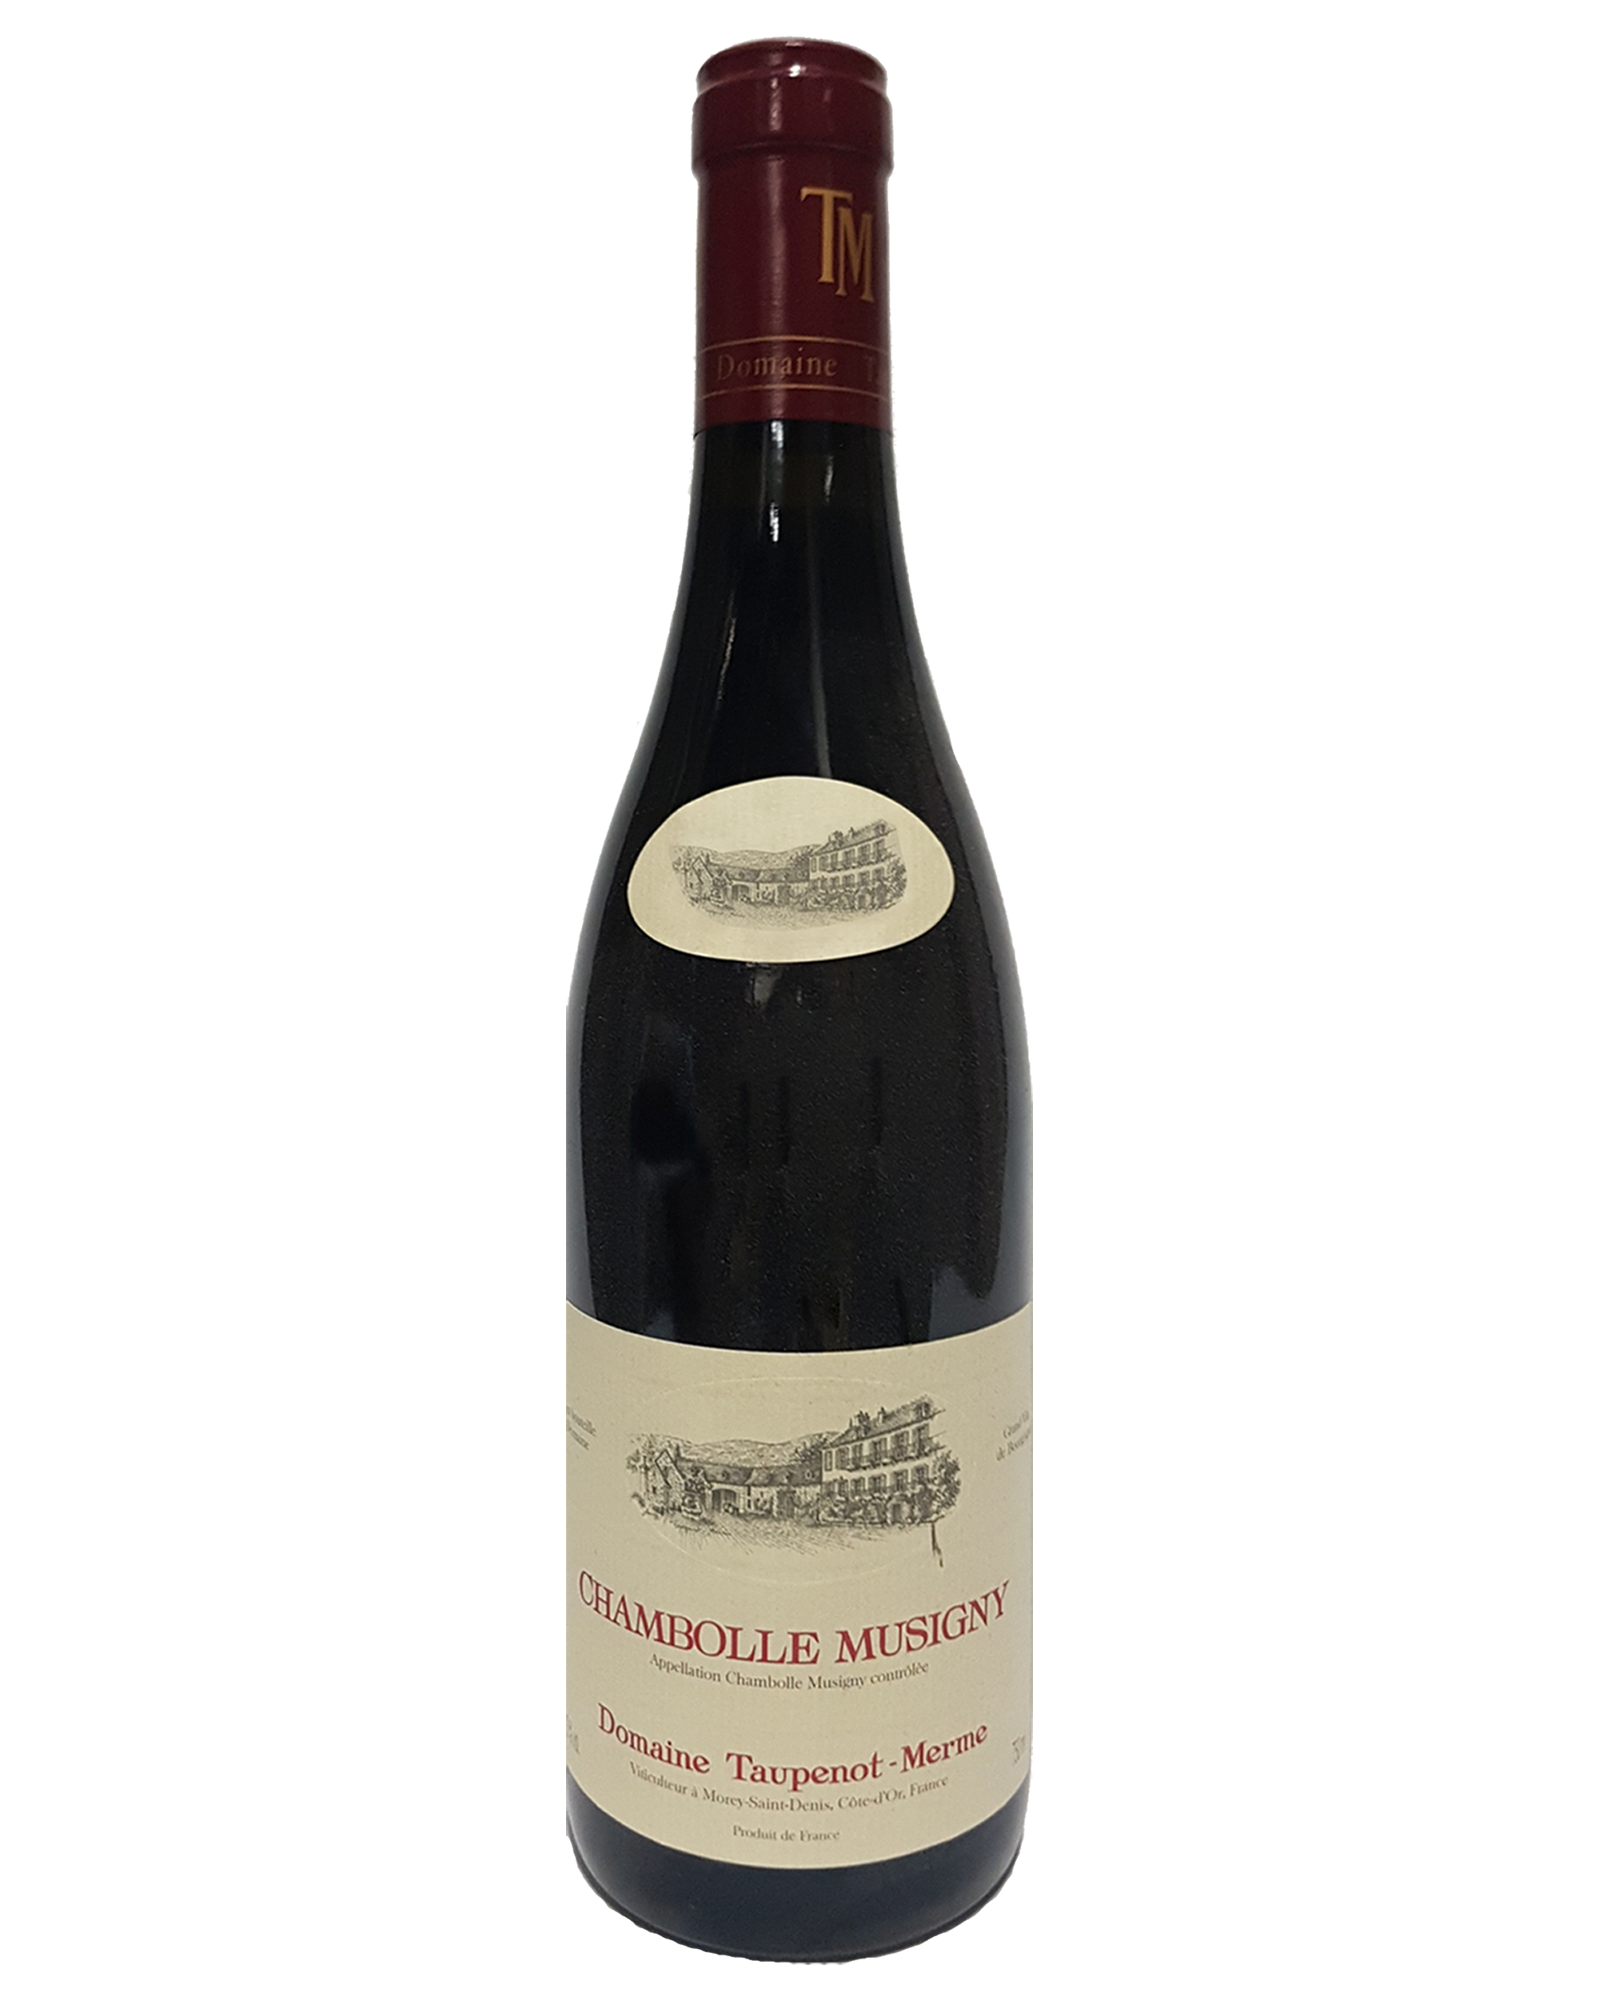 Domaine Taupenot-Merme Chambolle Musigny